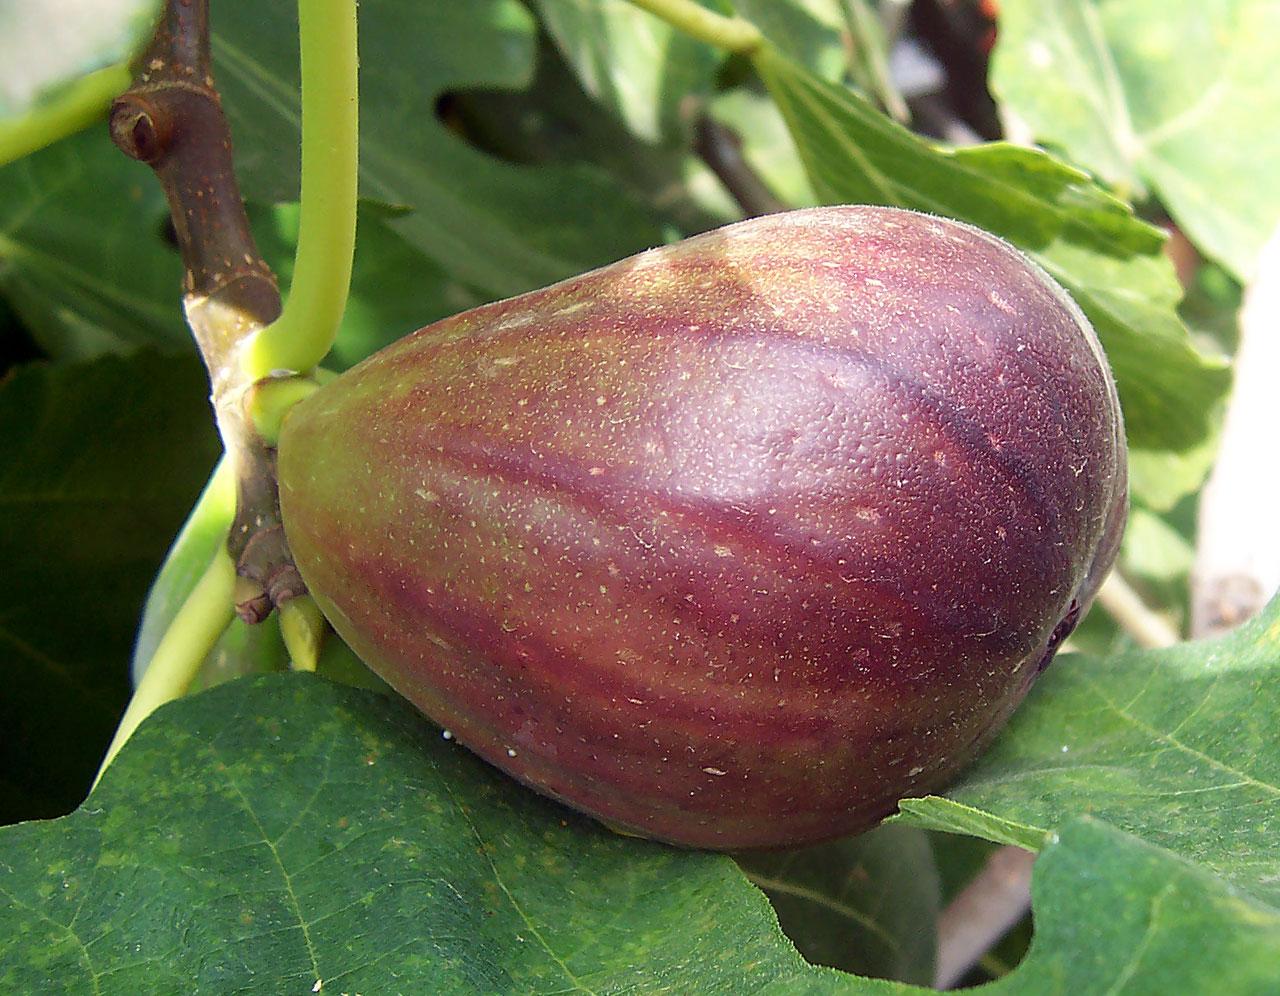 a purple-lime fruit with green leaves and lime-brown stem